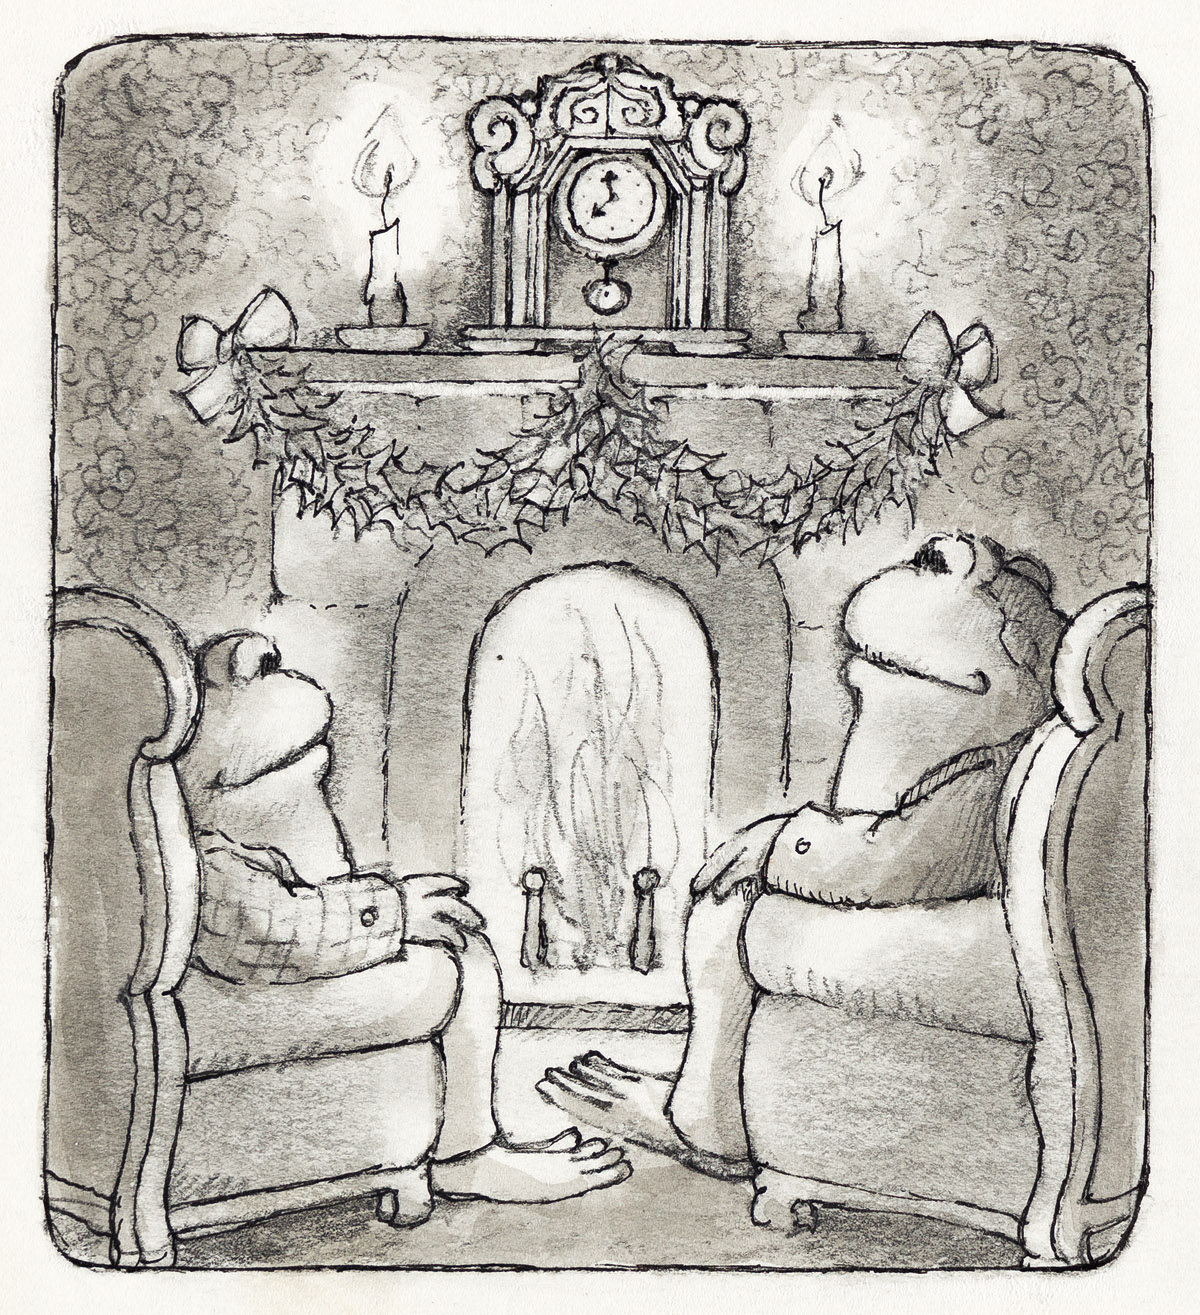 ARNOLD LOBEL (1933-1987) Toad opened his present from Frog. It was a beautiful new clock.